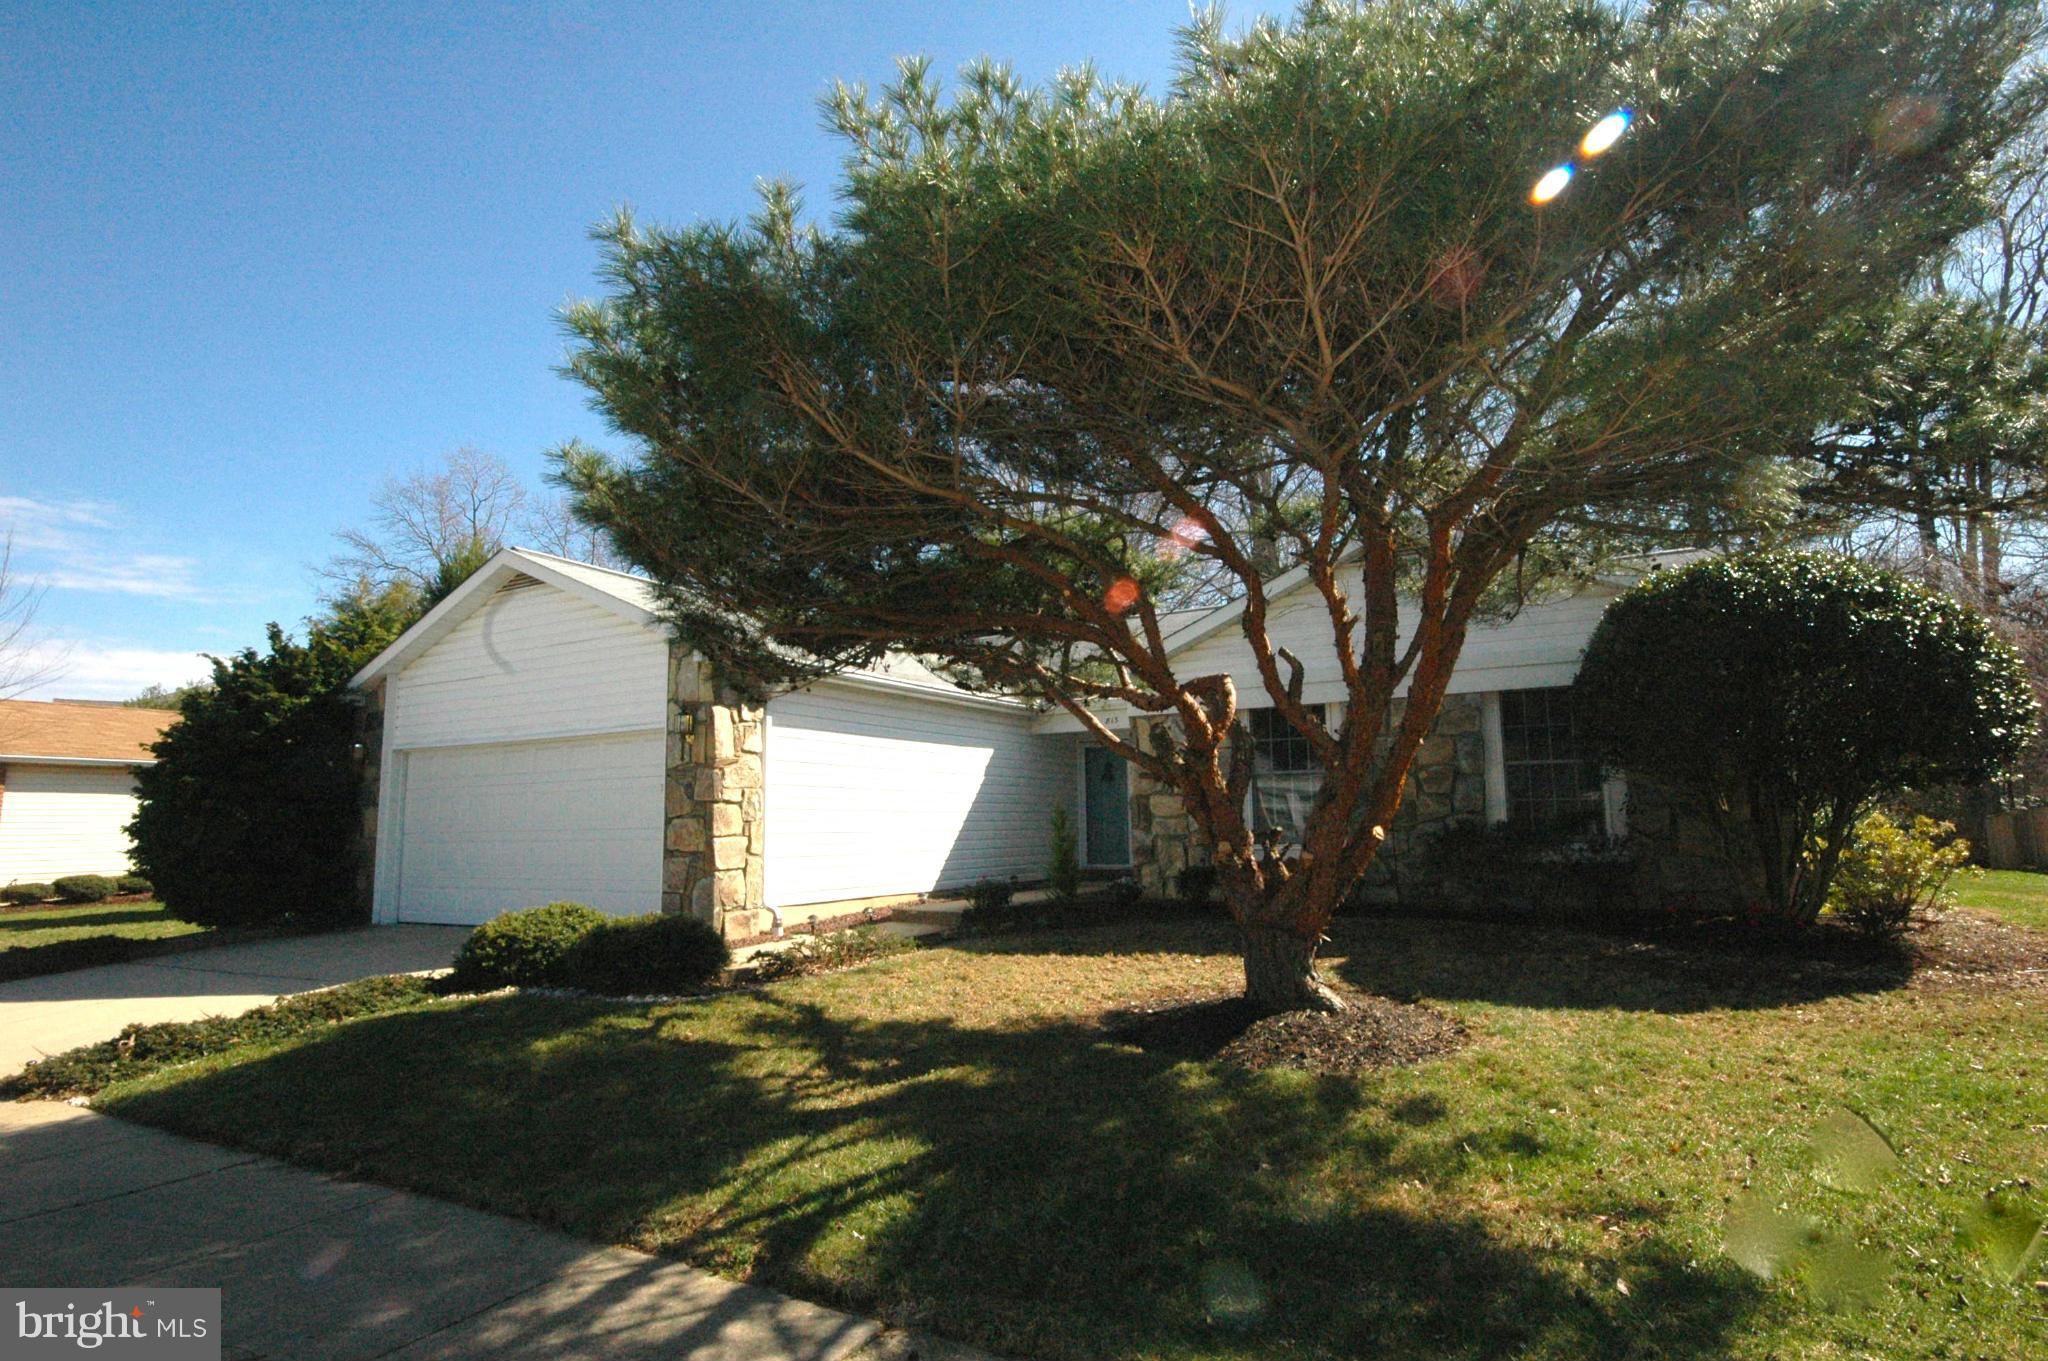 a view of a house with yard and tree s